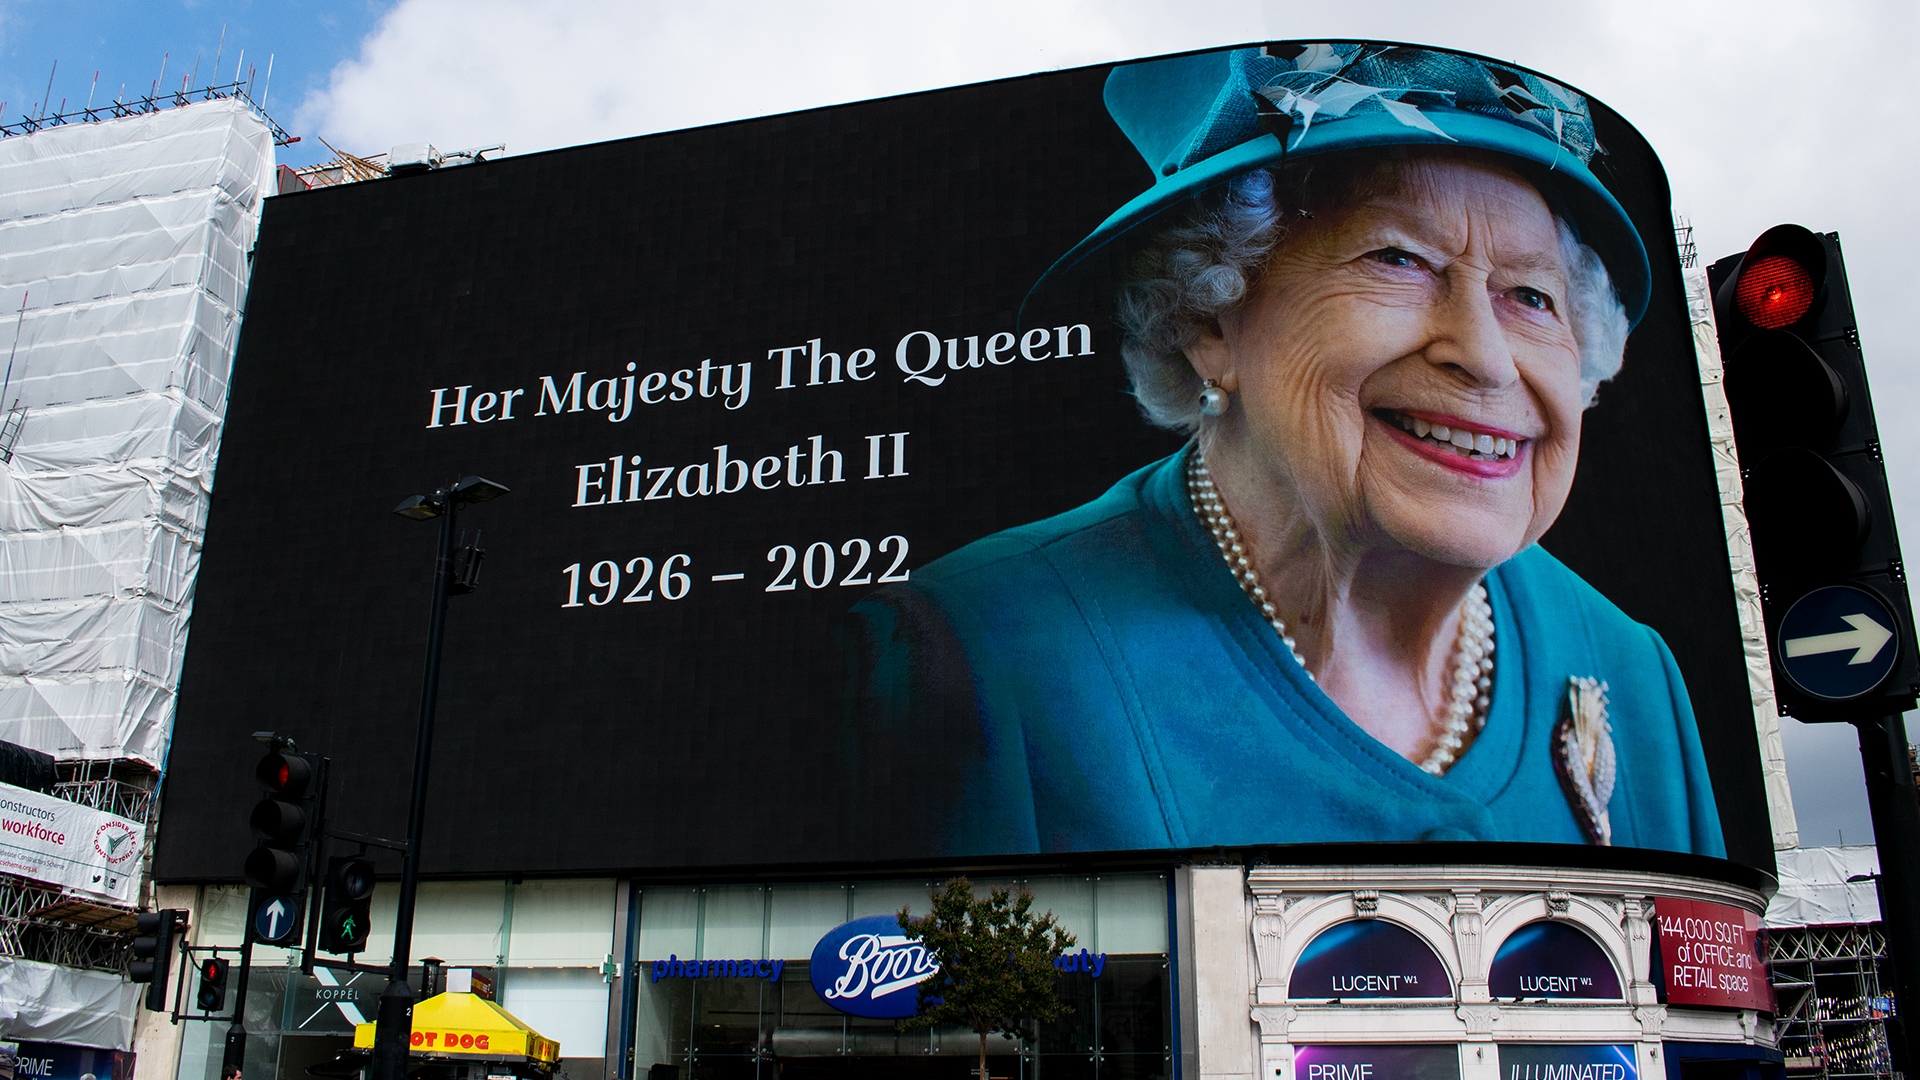 Piccadilly Circus pays tribute to Queen Elizabeth II